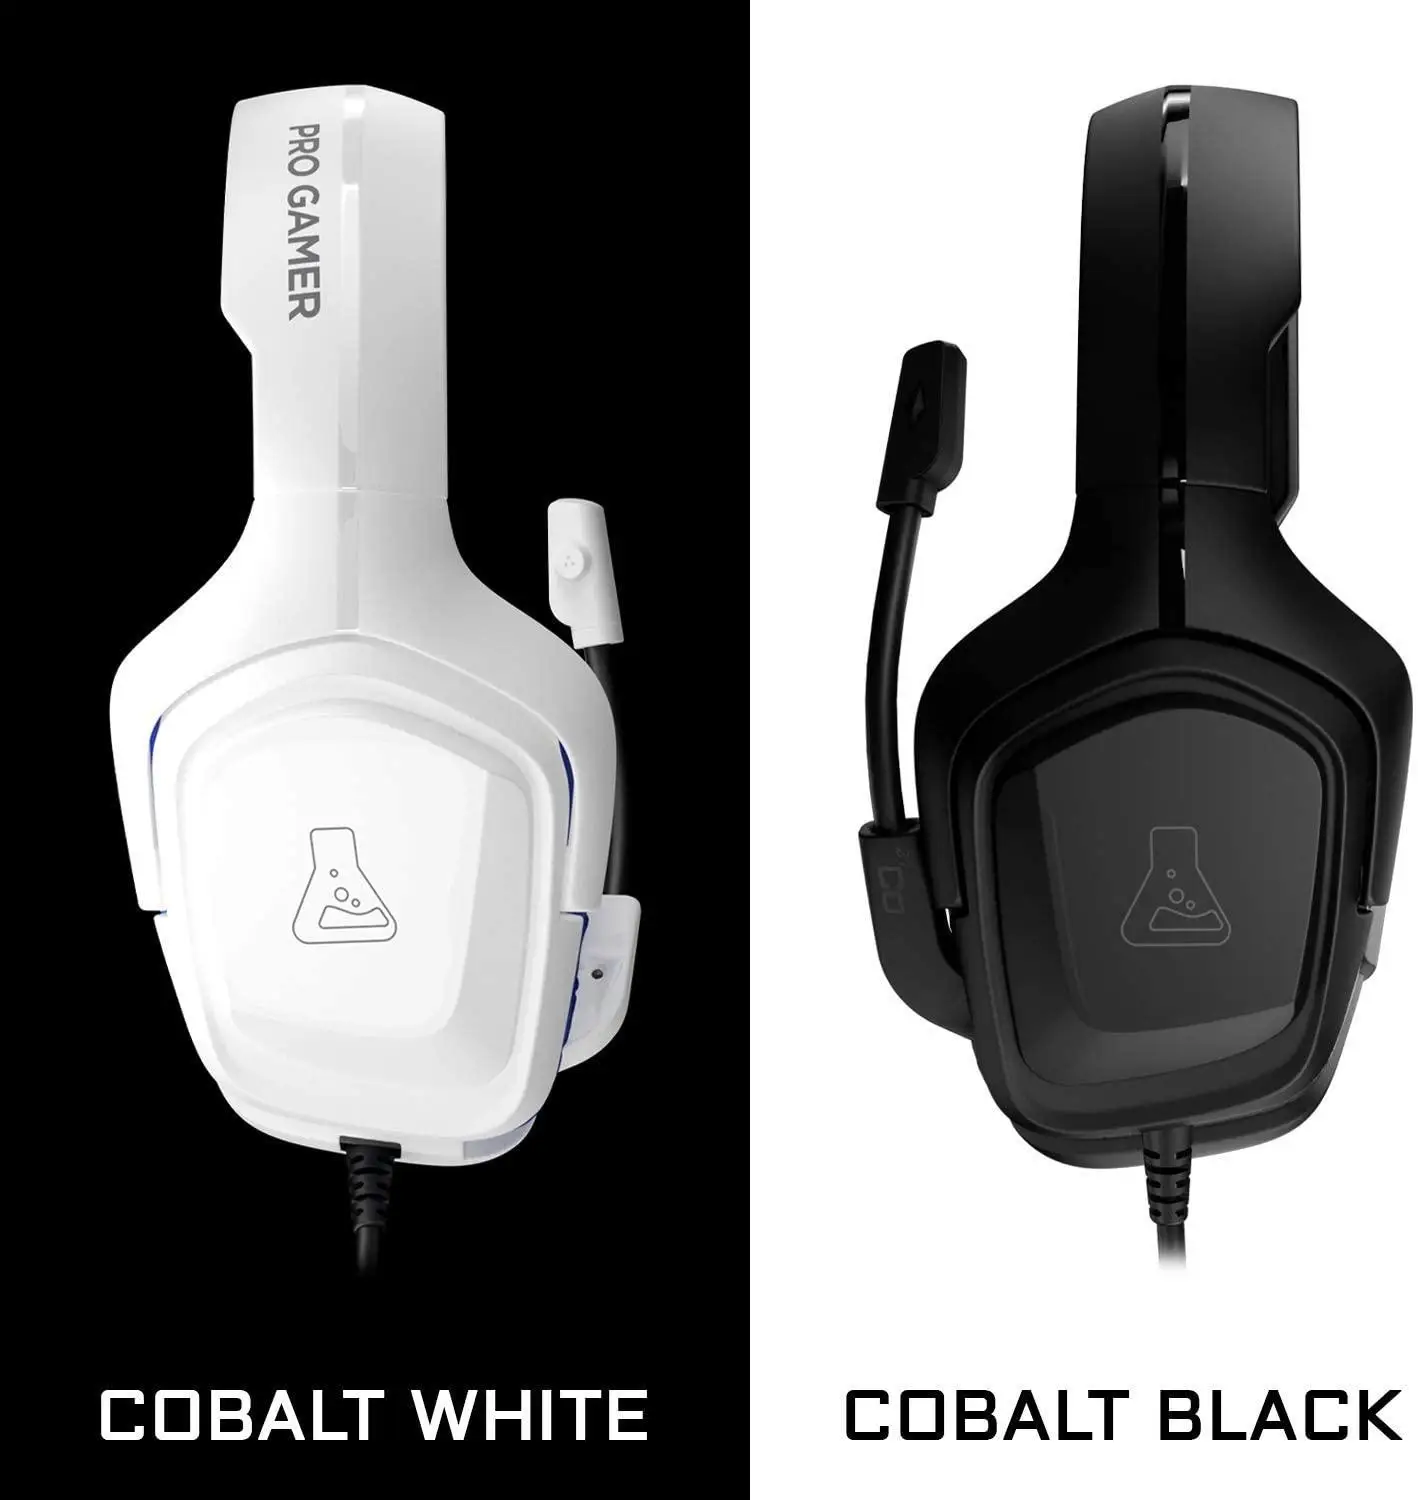 THE G-LAB Korp Cobalt Casque Gaming Compatible PC,PS4,XBOX,SWITCH